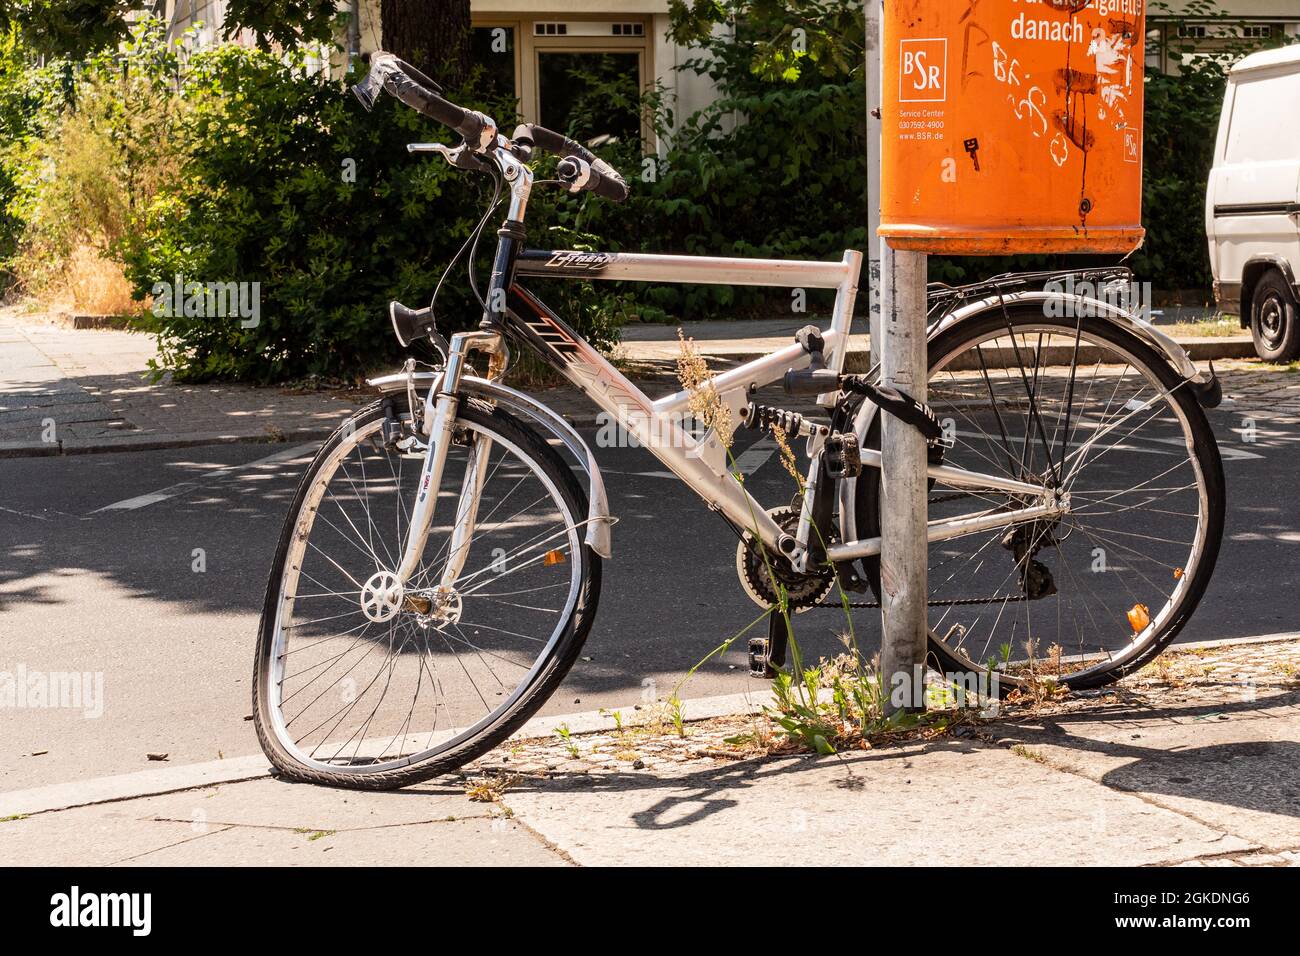 Texo-Trekking bike chained to a pole after a traffic accident Stock Photo